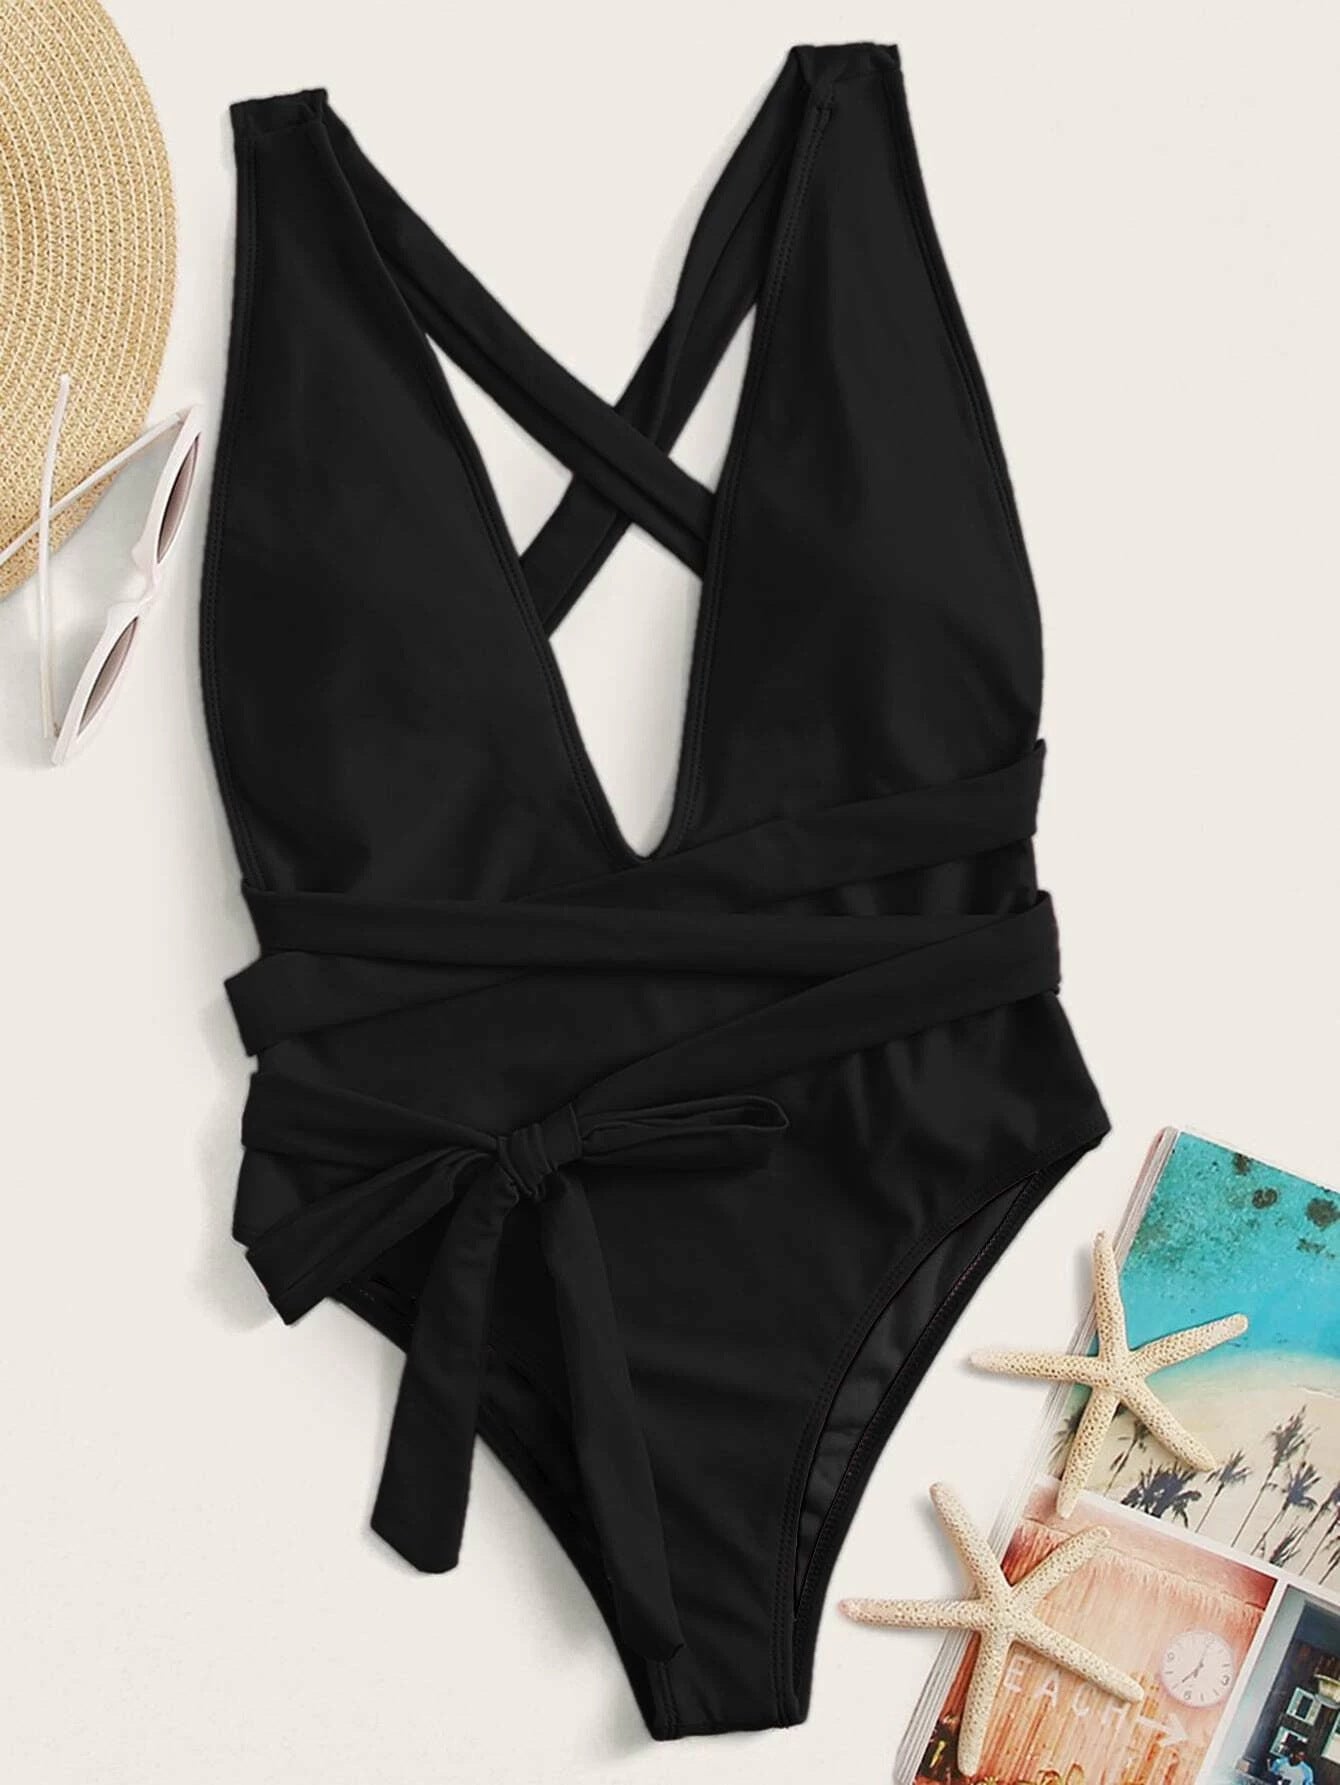 Deep V-Neck Swimsuit: A swimwear piece with a plunging V-shaped neckline, adding a touch of allure and style to your beach or poolside look.